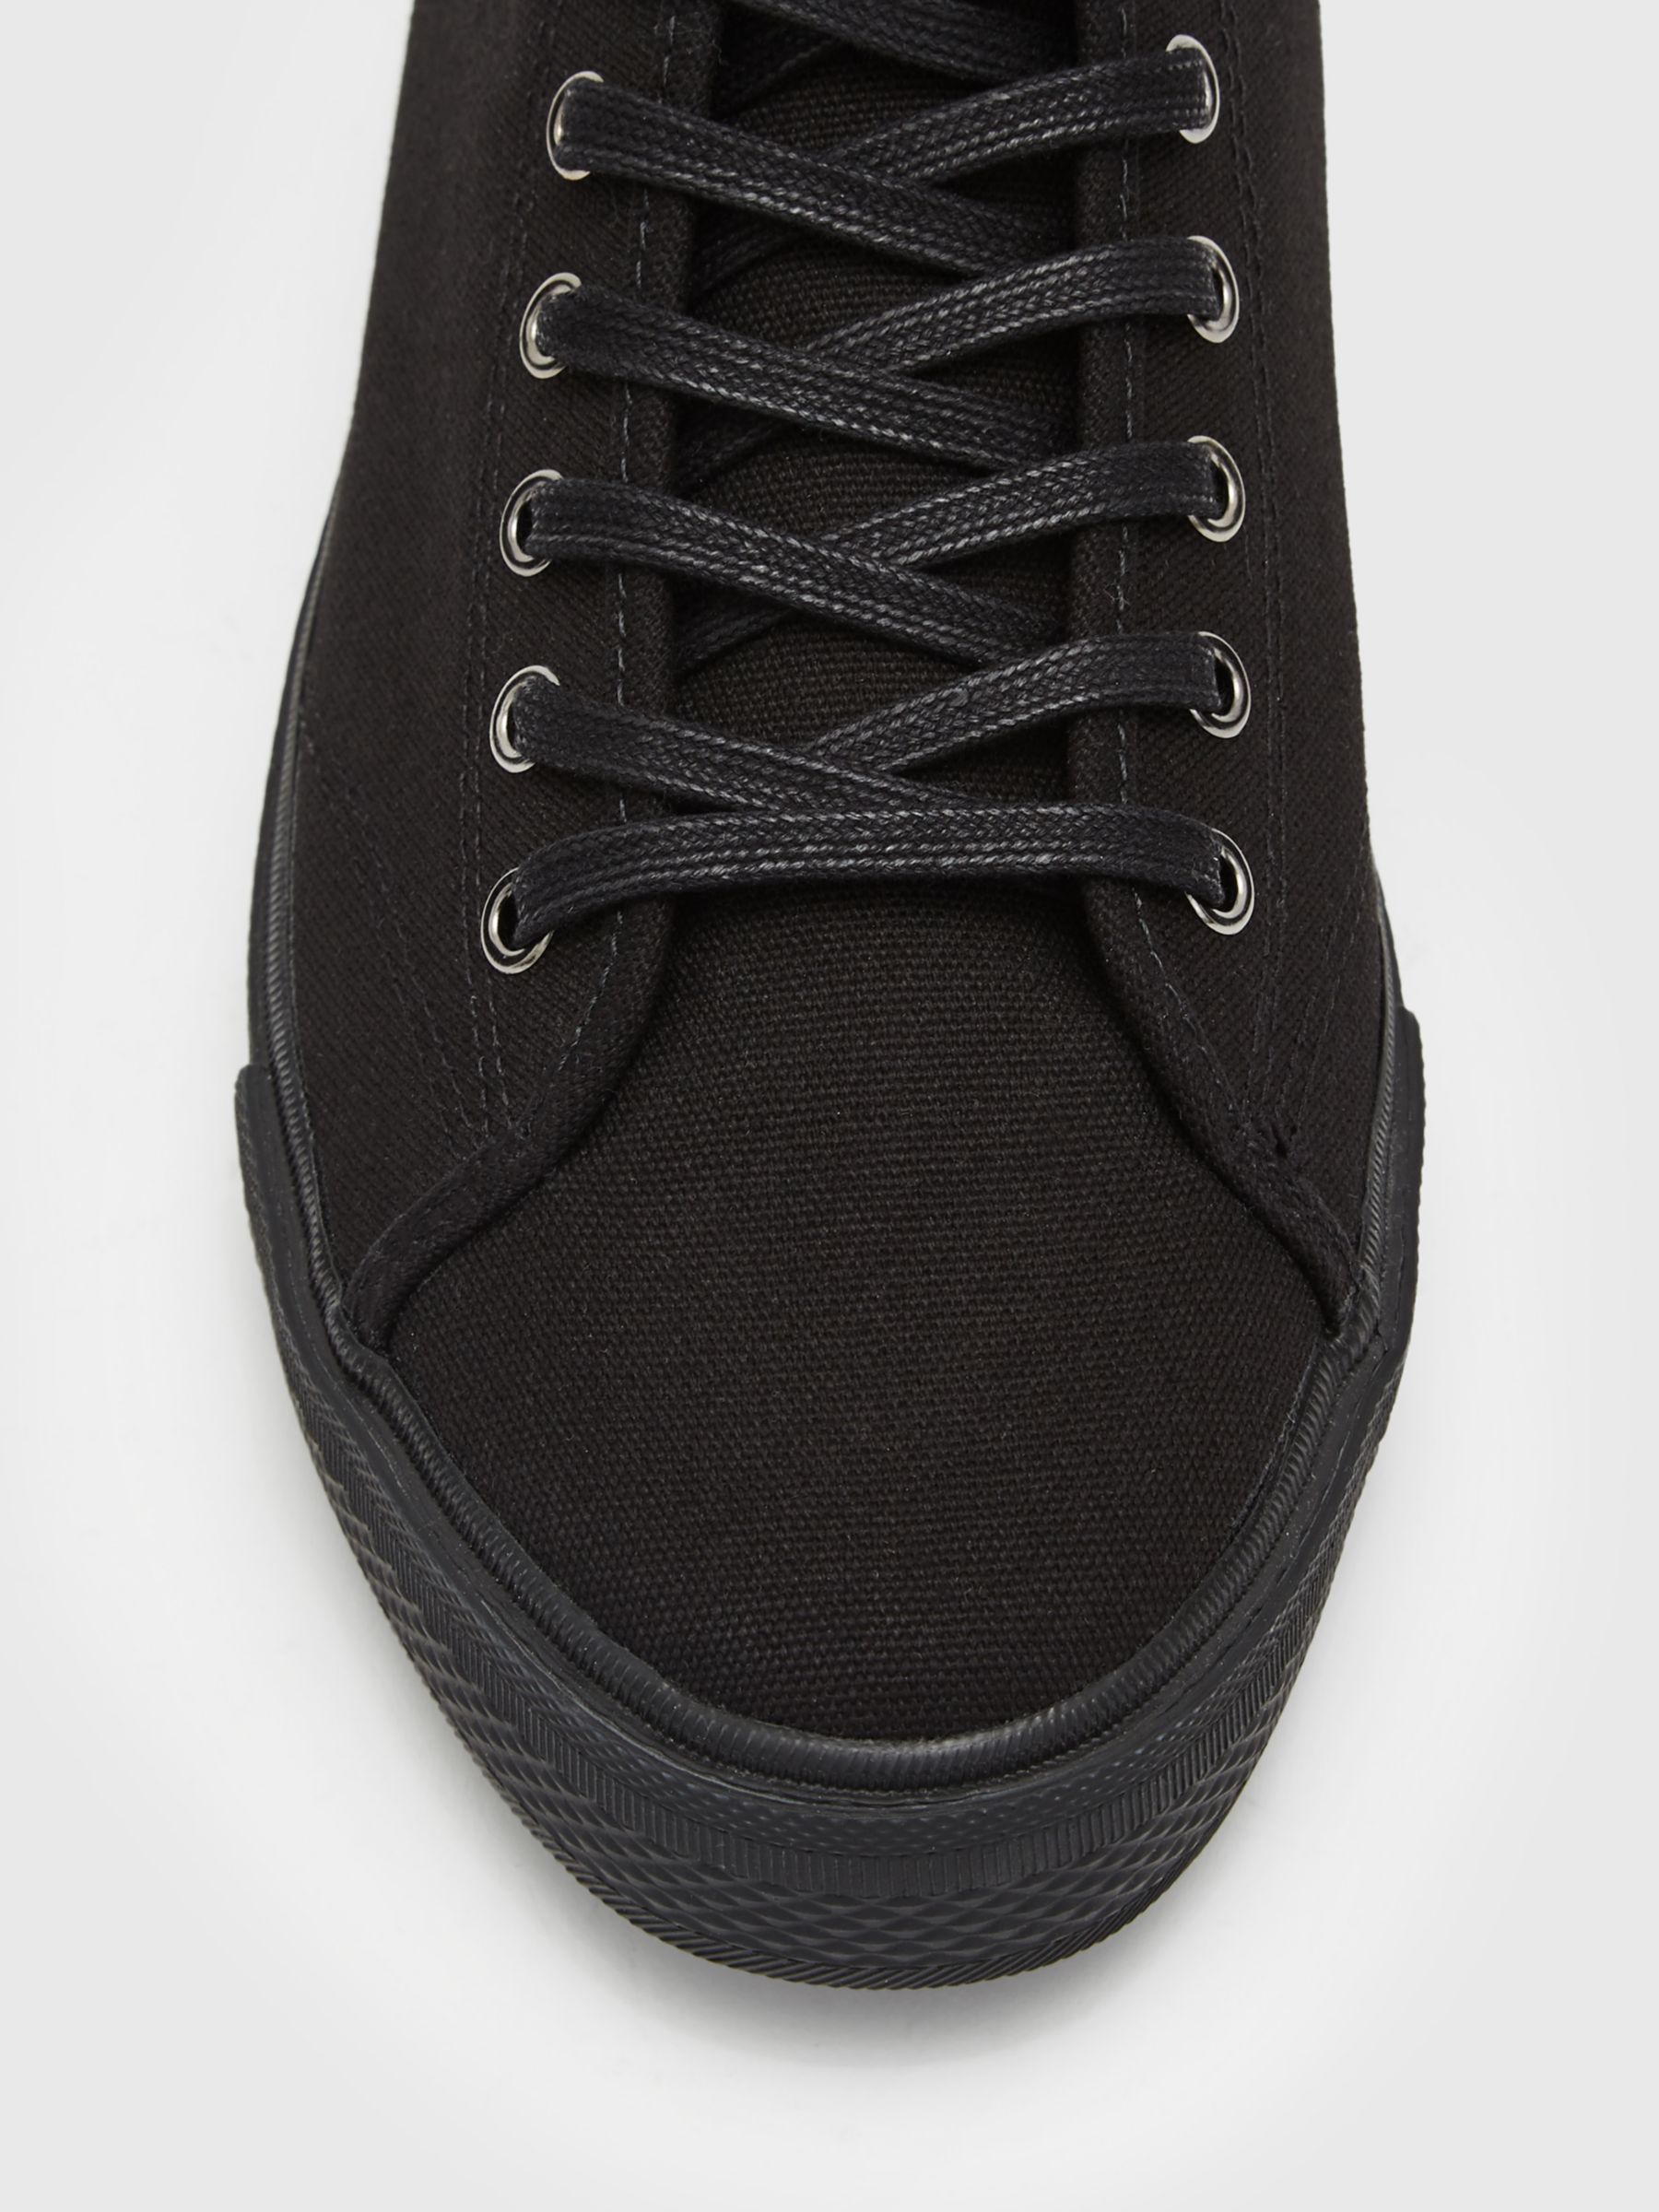 AllSaints Bryce Canvas High Top Trainers, Black at John Lewis & Partners